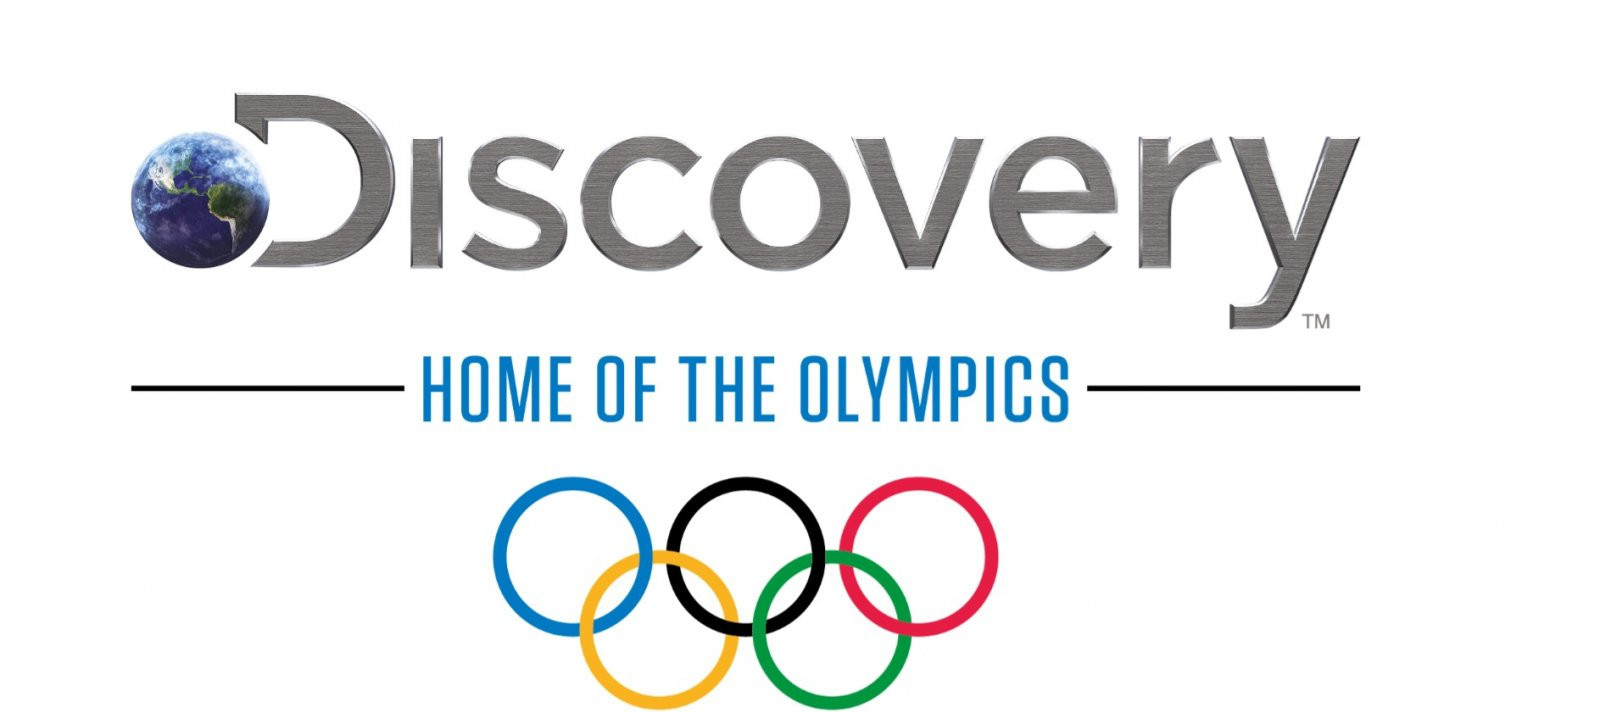 Olympic rights-holder Discovery announces merger with Warner